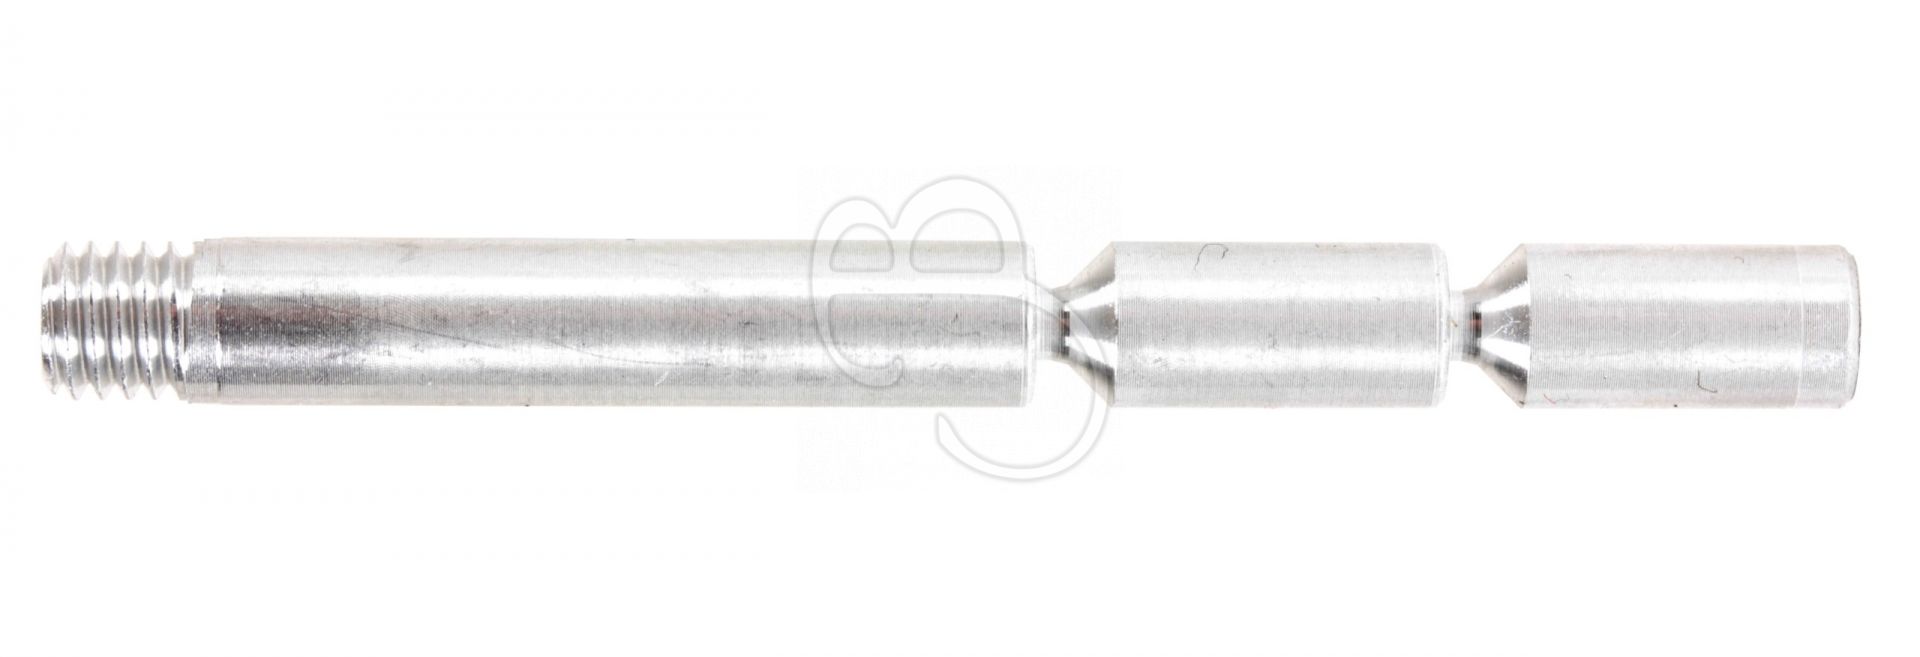 CROSS-X POINT IN-OUT BR.OFF ROD ALU-18